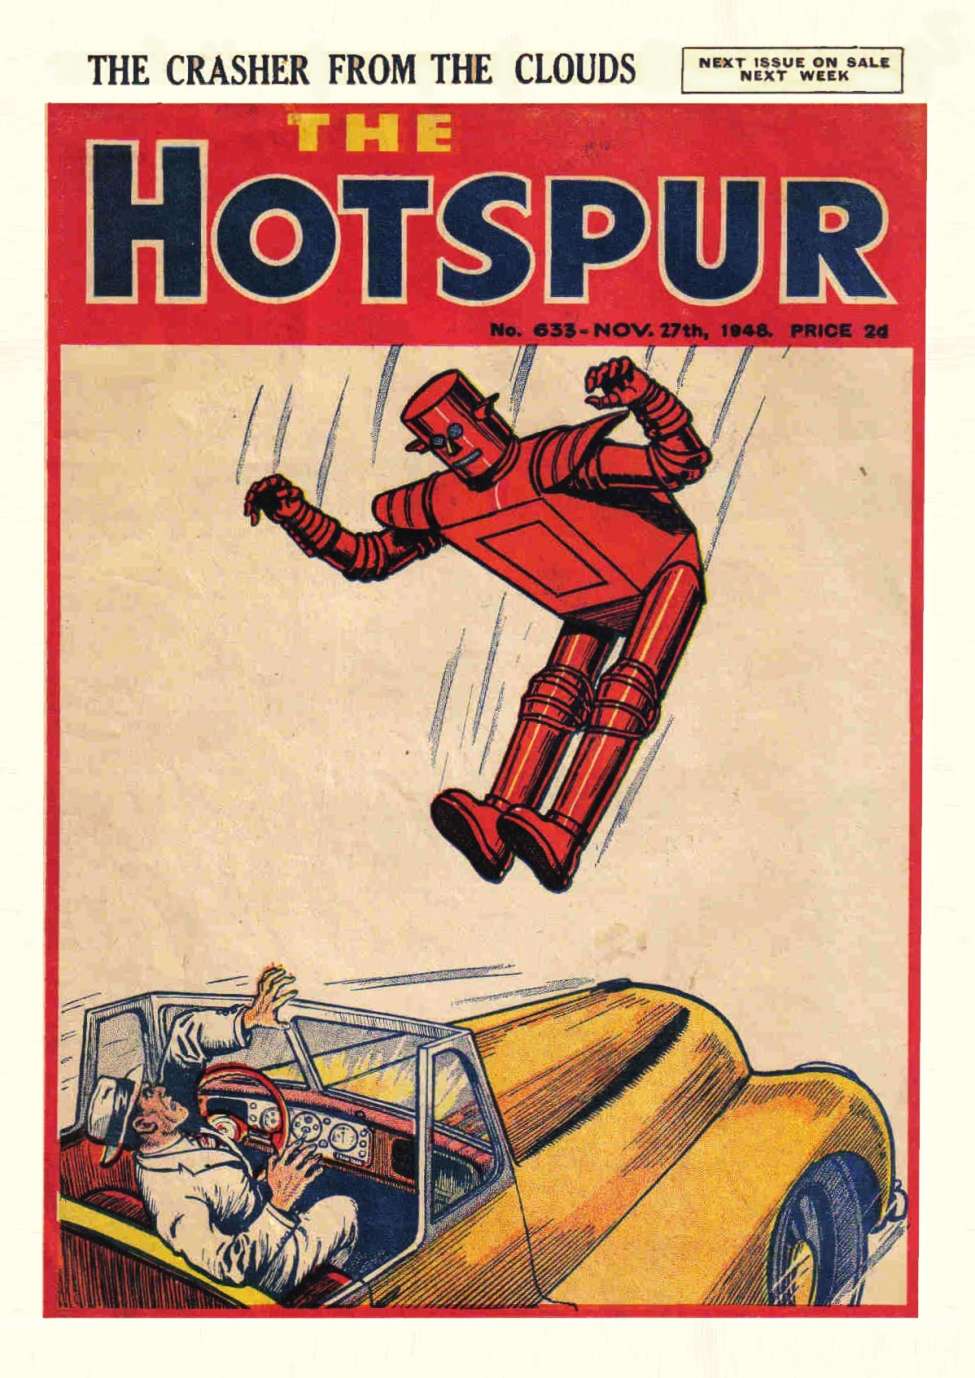 Comic Book Cover For The Hotspur 633